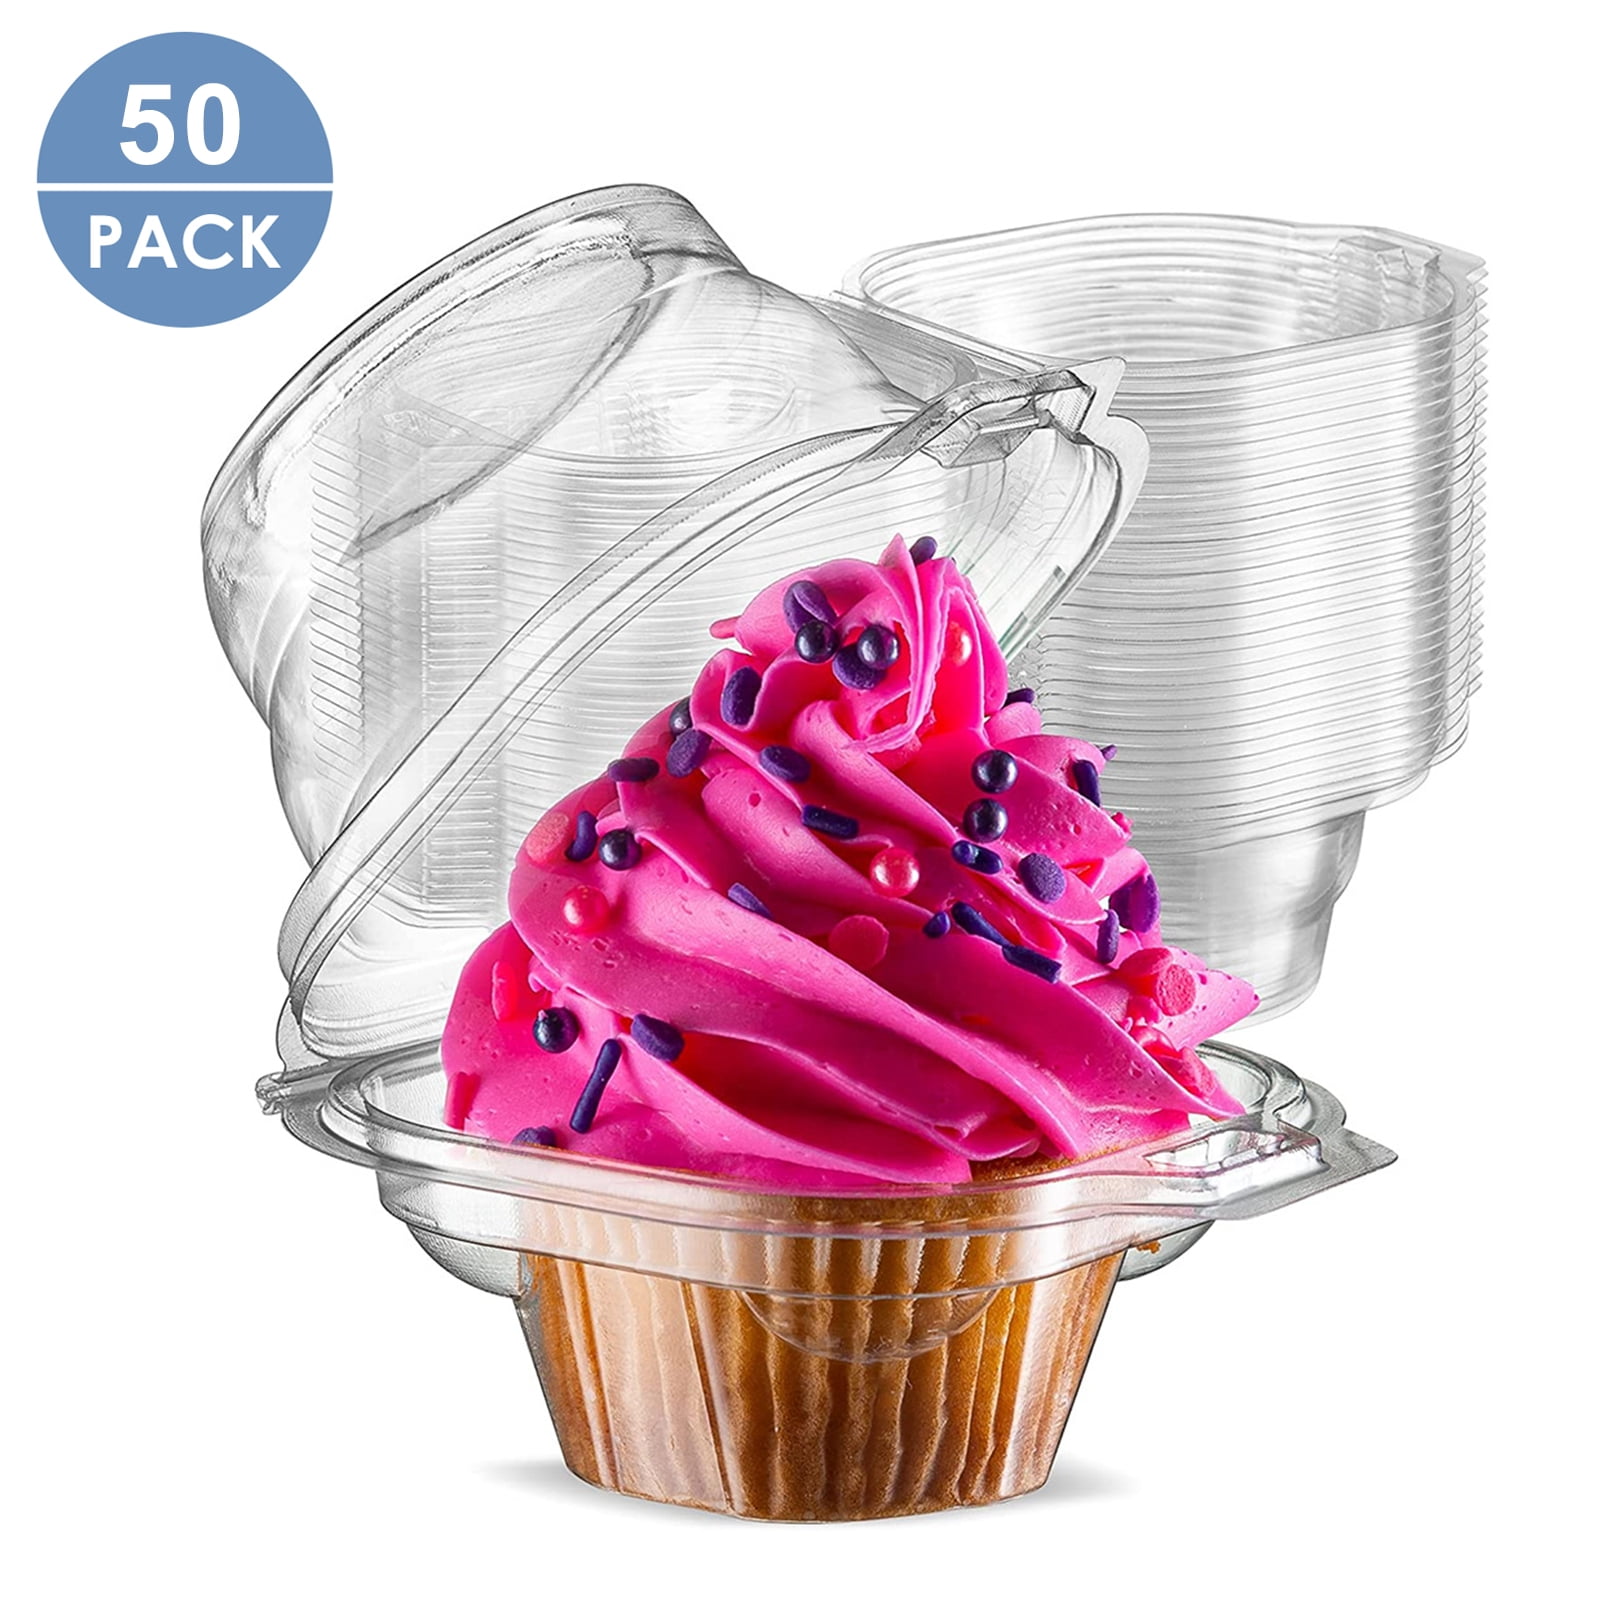 Plastic 1 Ct Cupcake Container › Sugar Art Cake & Candy Supplies